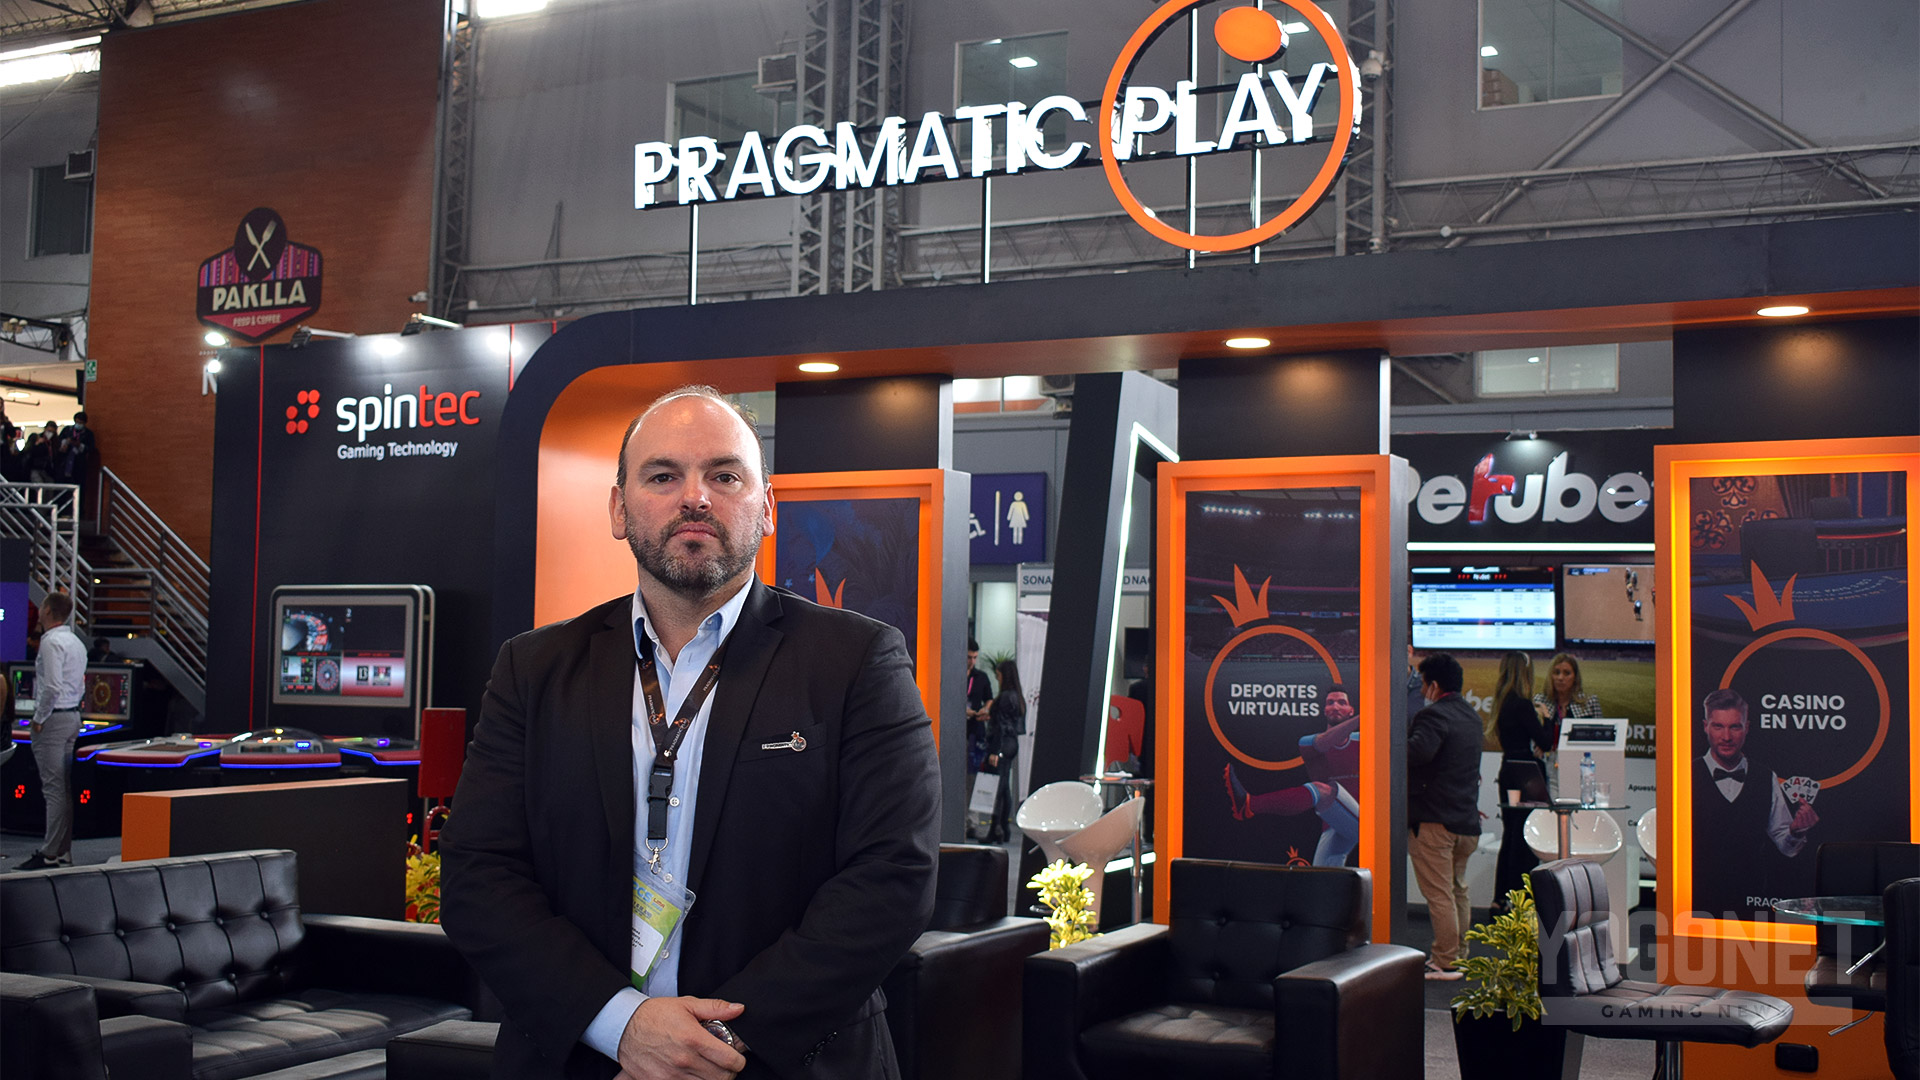 Pragmatic Play: “LatAm is one of the most exciting regions in iGaming, and it’s something we’re looking to capitalize on"